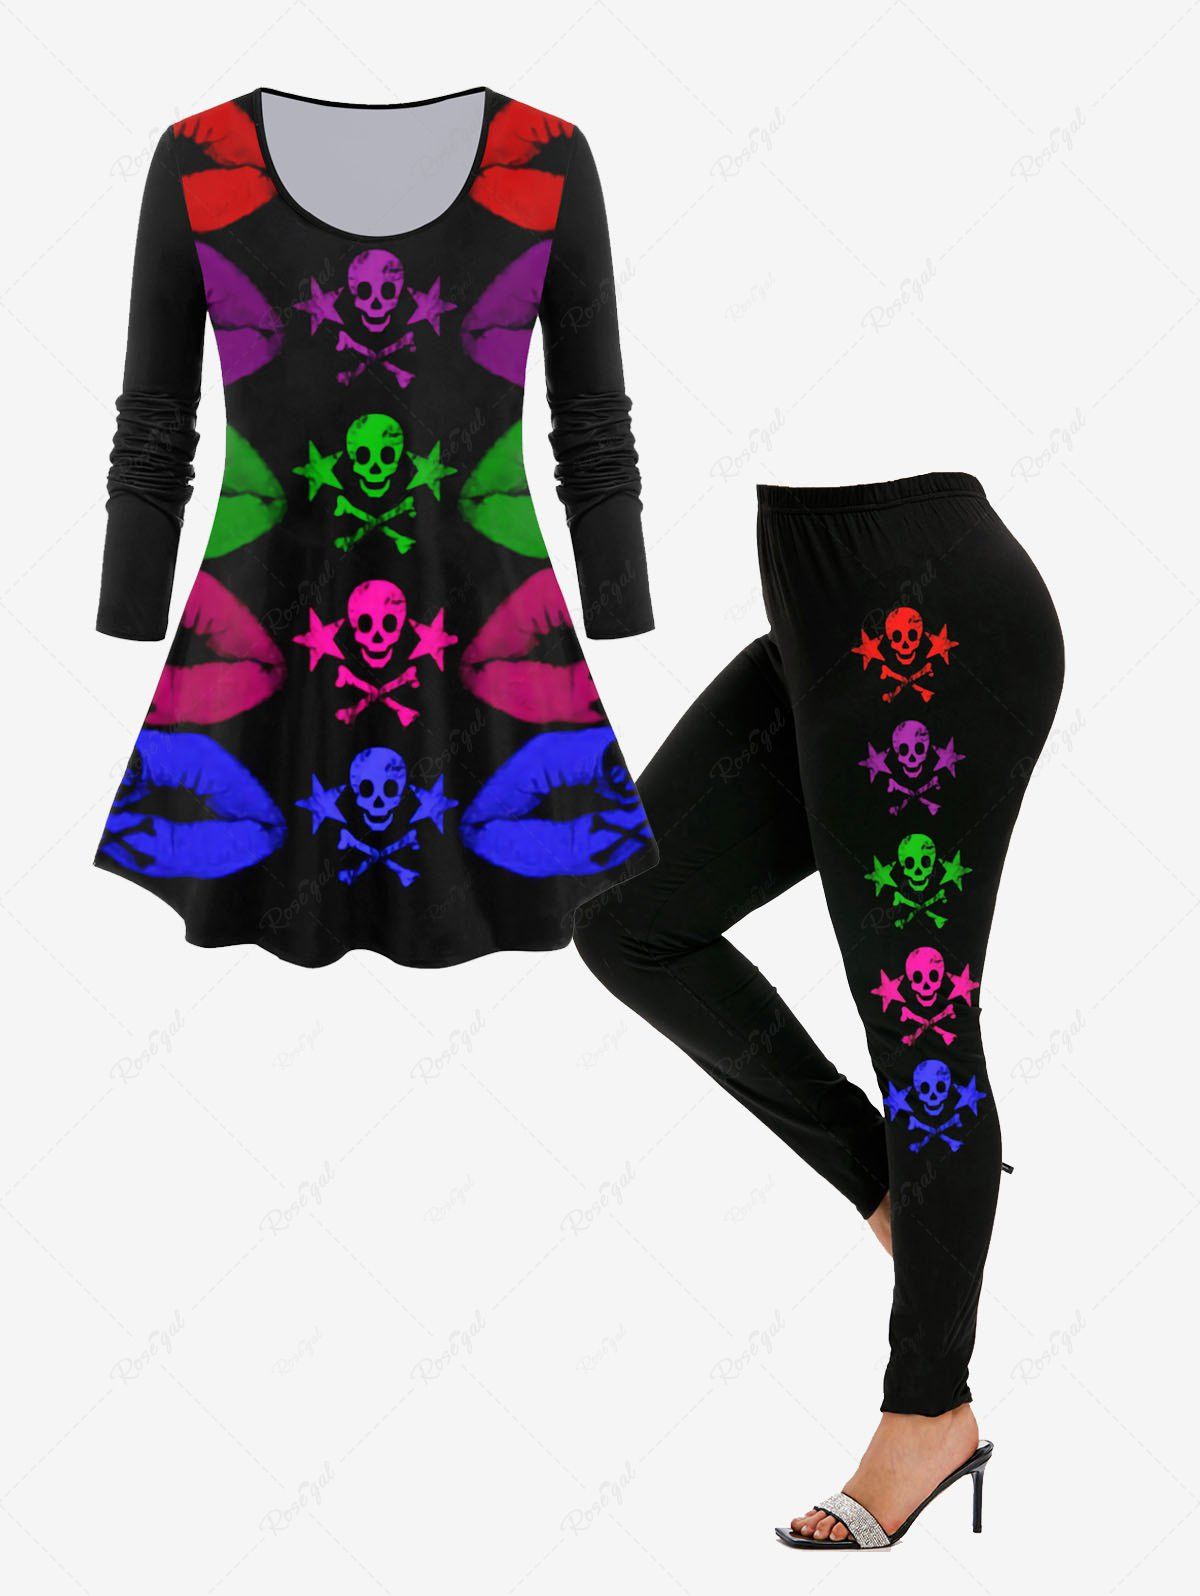 Discount Gothic Colorful Skull Lip Print T-shirt and High Waist Gothic Skull Print Leggings Plus Size Outfit  